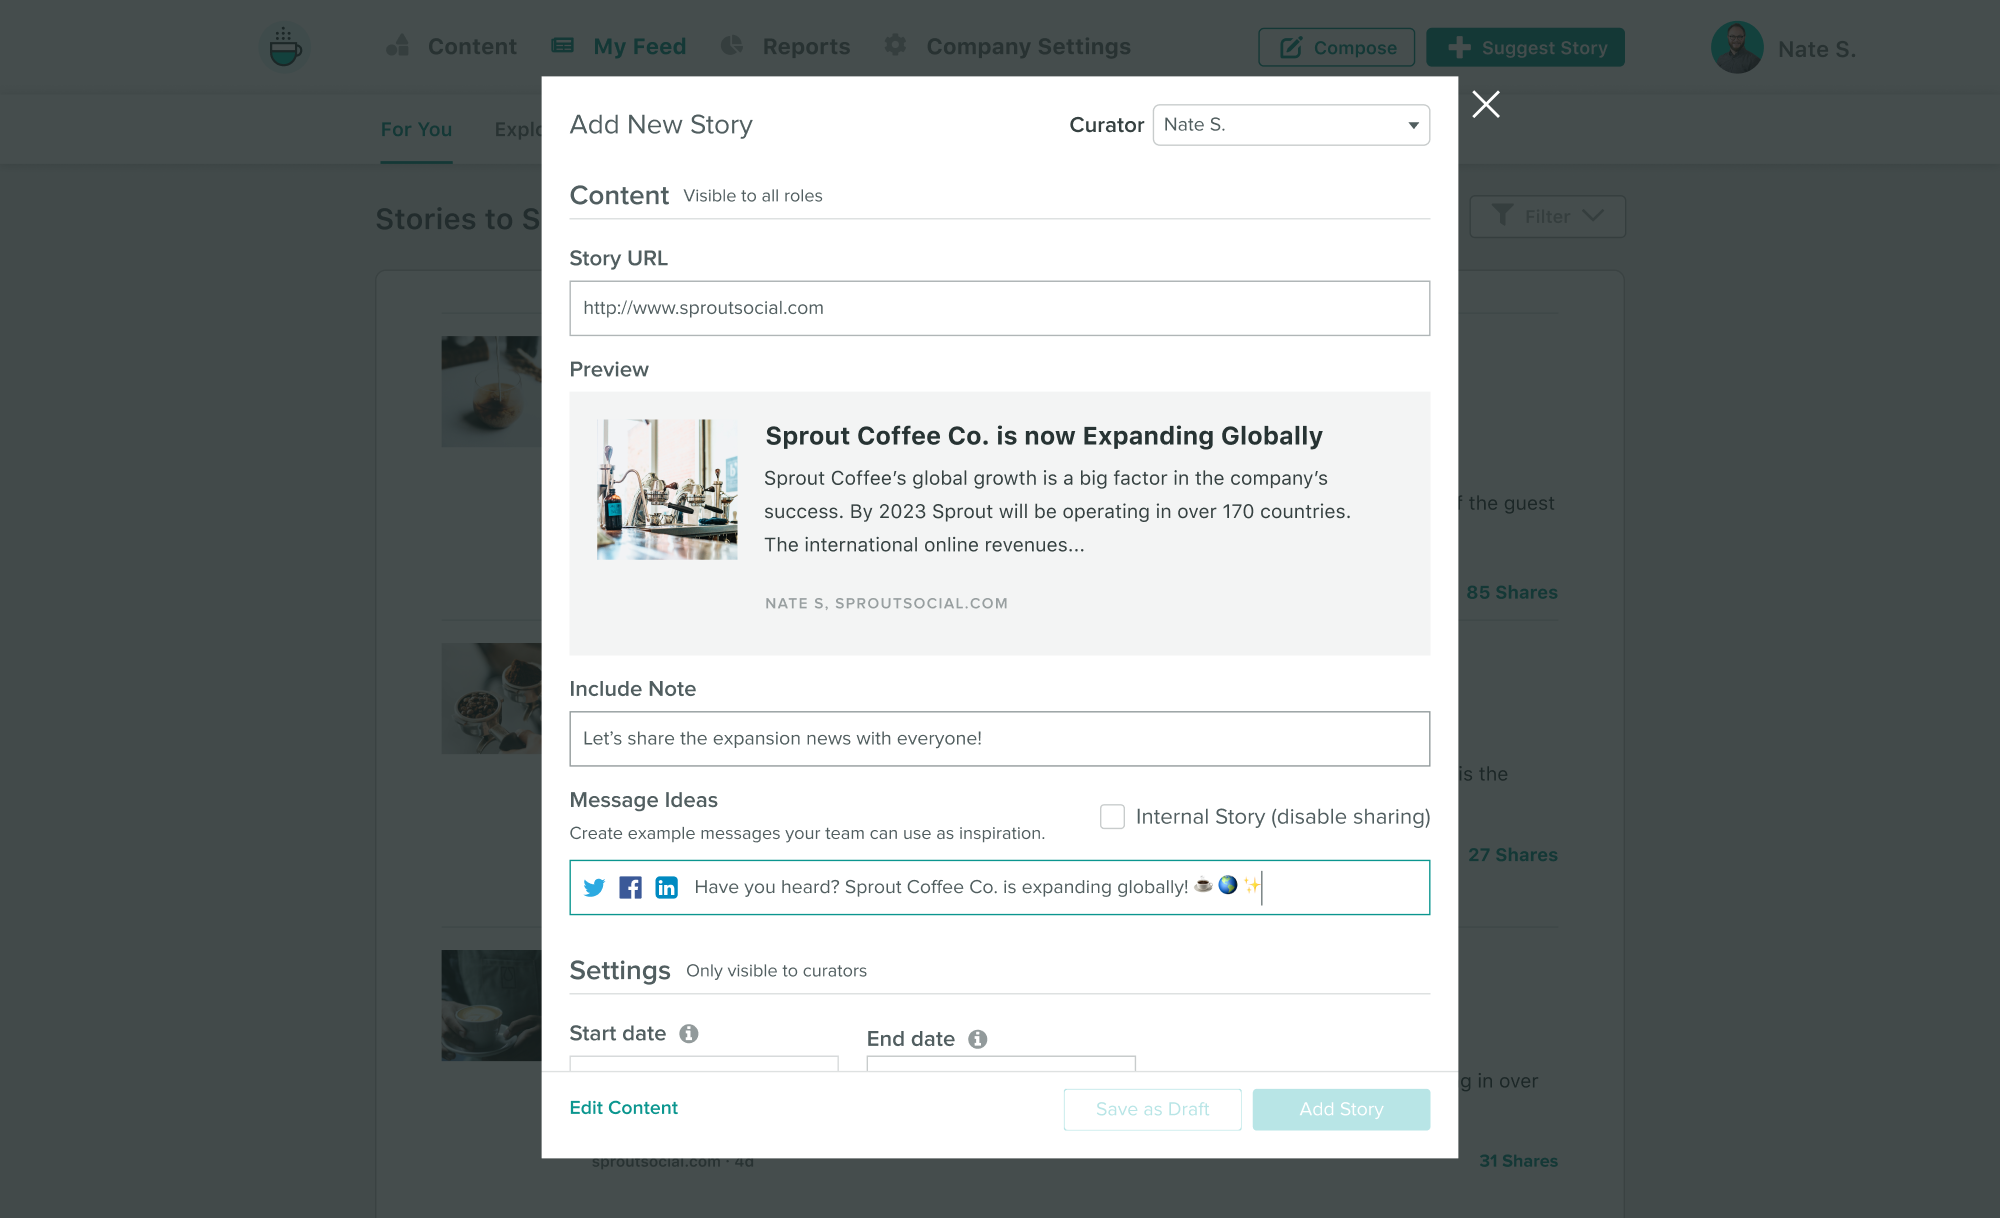 A screenshot of Sprout's Employee Advocacy platform that demonstrates how users can curate a new story for their internal team to share.